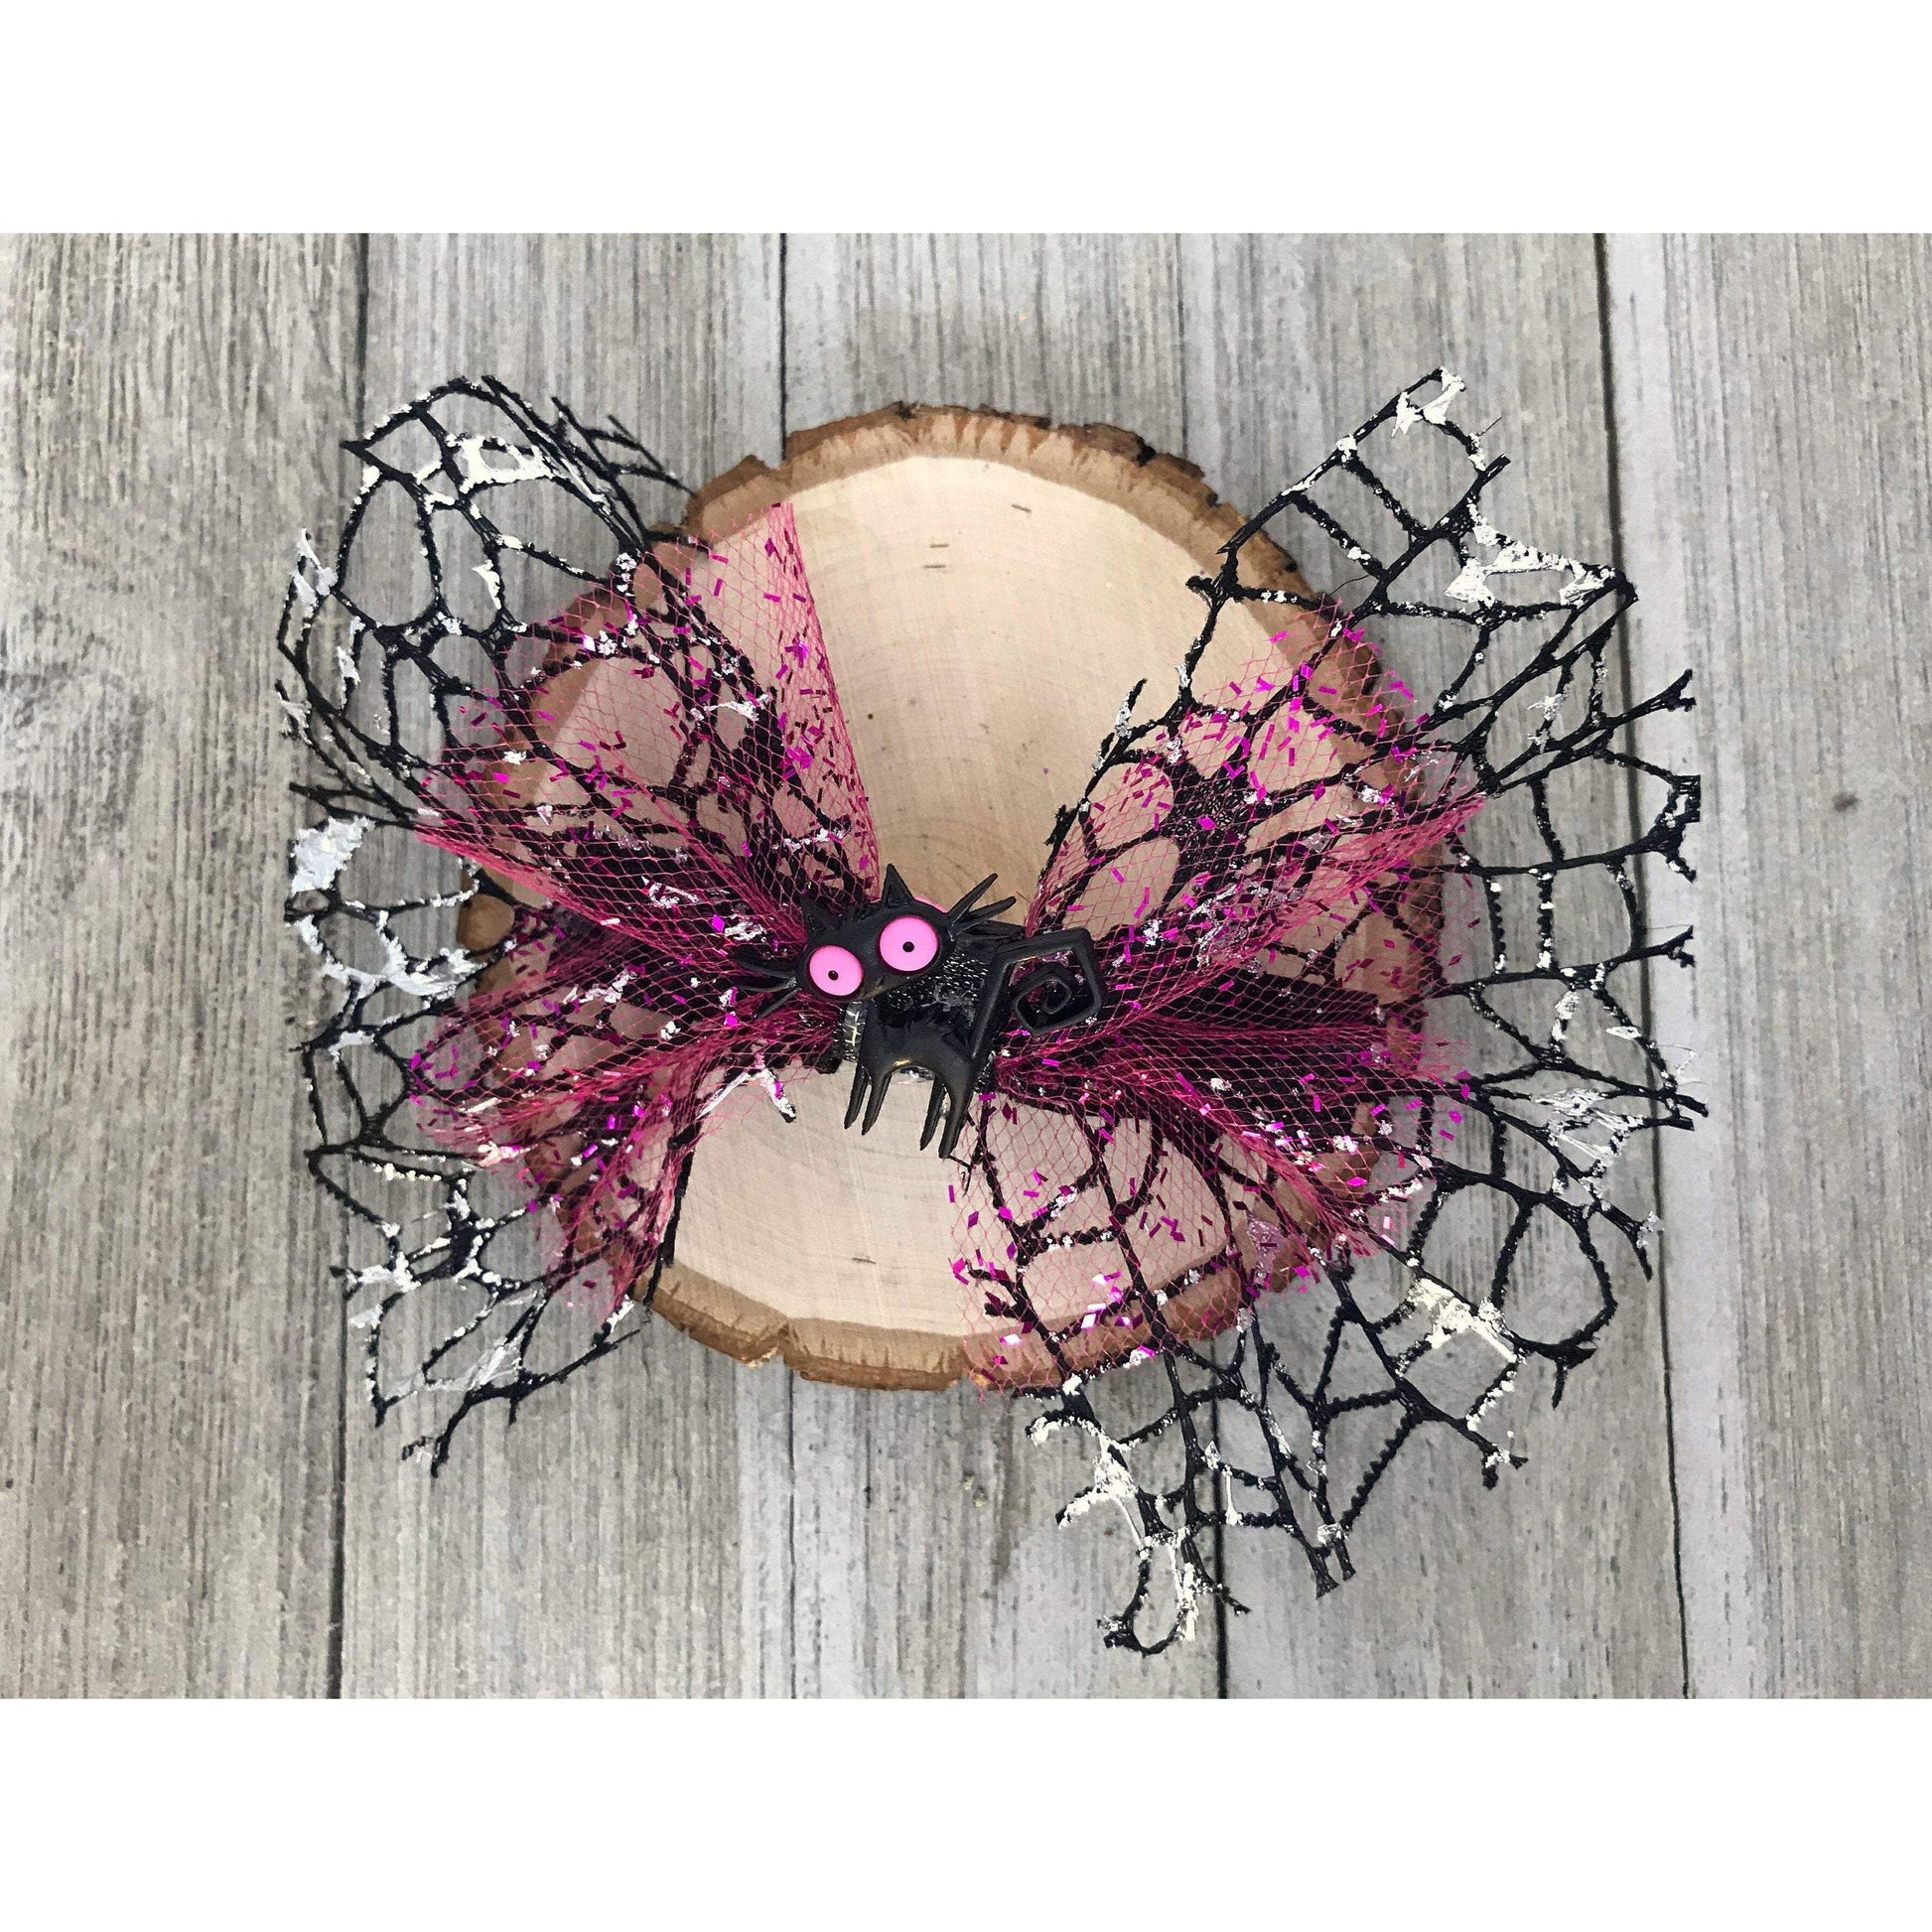 Halloween Black Spooky Cat Pink Hair Bow - Fun & Festive Halloween Accessory with a Pop of Color